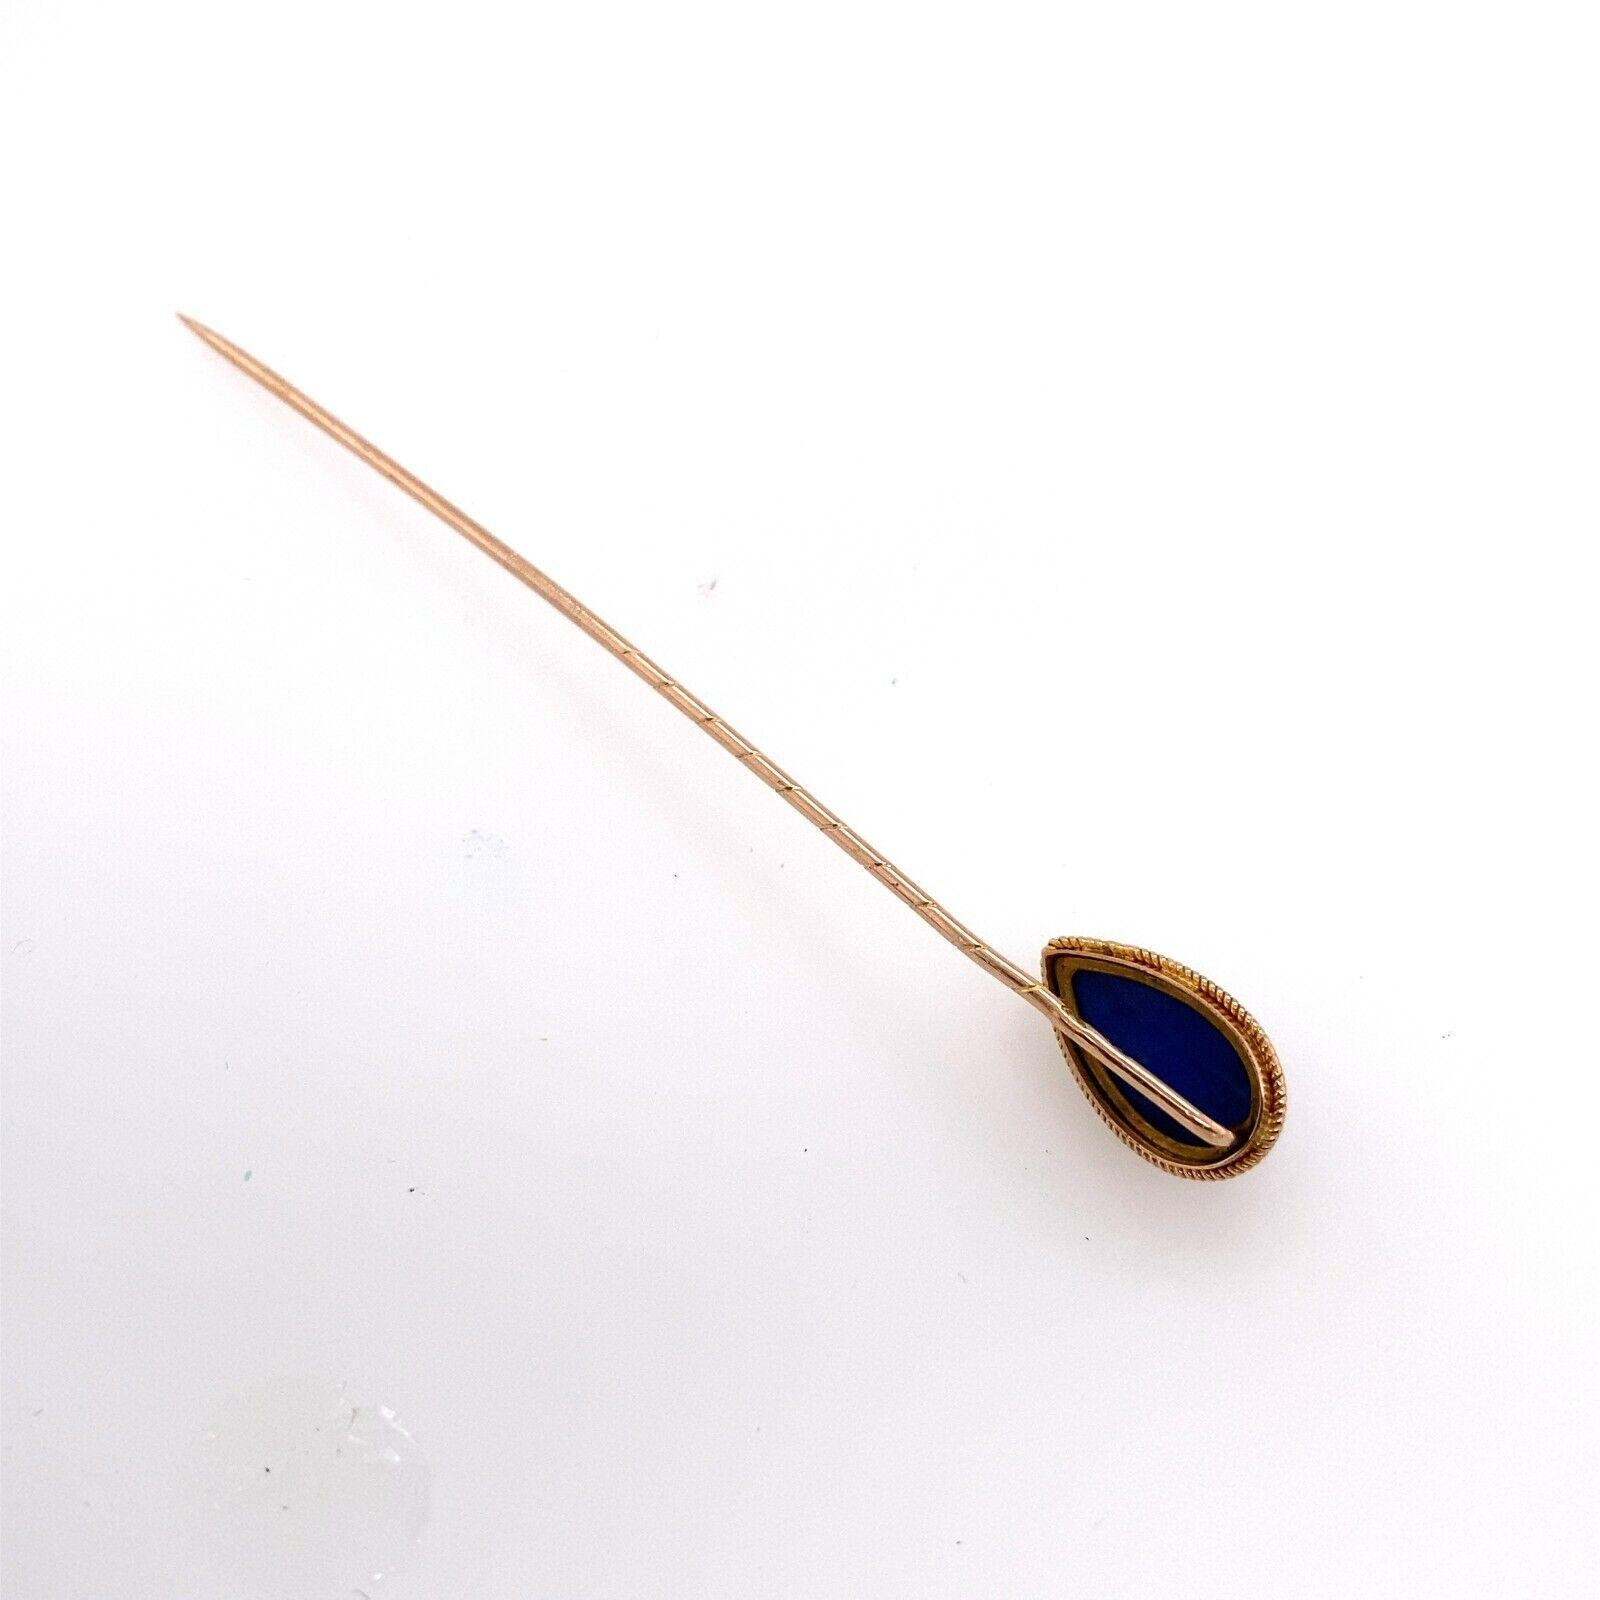 Cabochon Pear Shape Lapis, Set In 18ct Yellow Gold Twisted Pin

Lapis Lazuli are powerful intensely blue stones. They have a strong Spiritual energy and have been used since ancient times and are still in use today.

Additional Information: 
Total